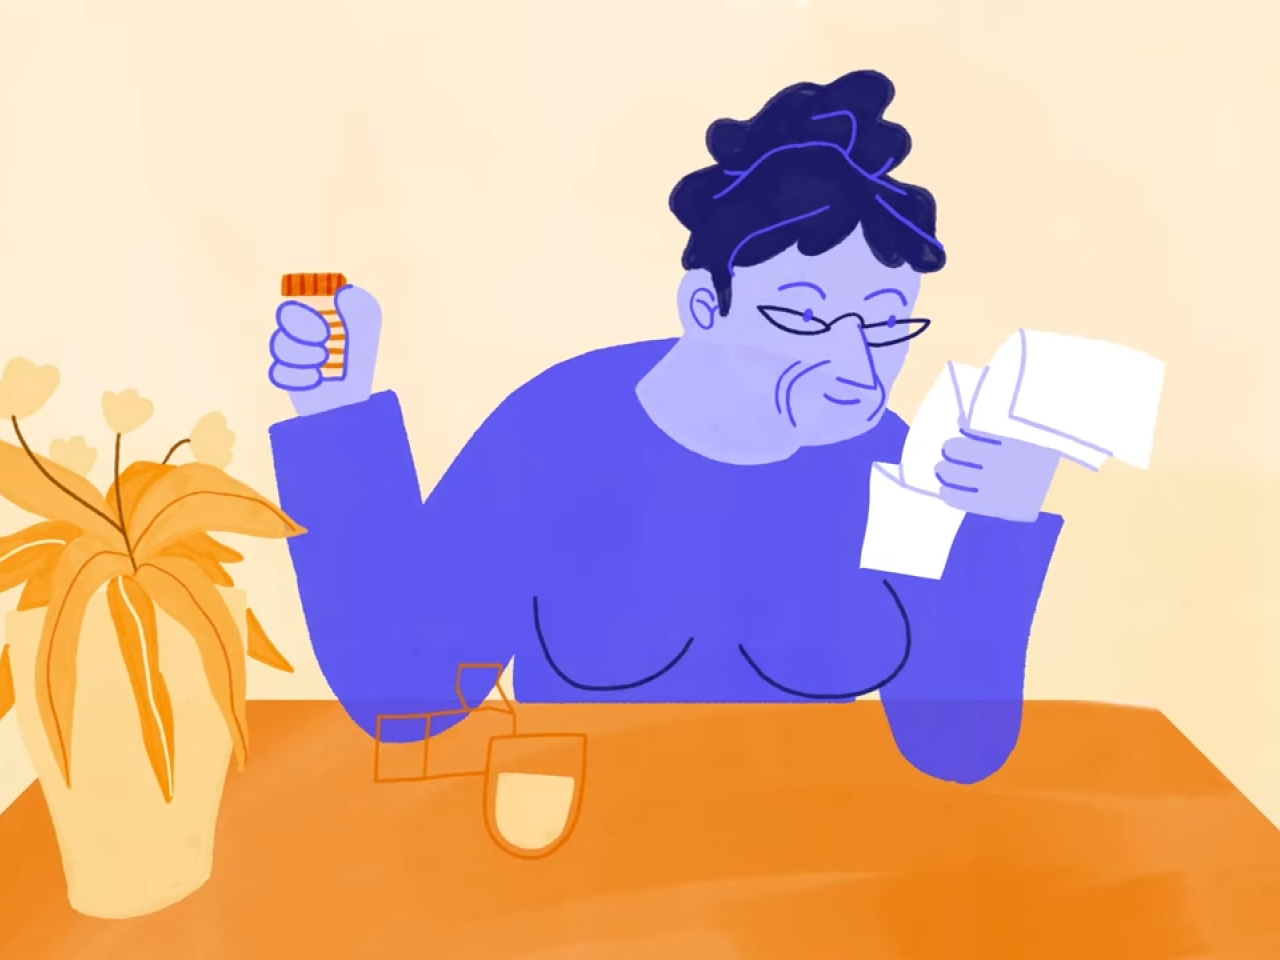 An illustration of a person holding a medicine bottle and reading a piece of paper